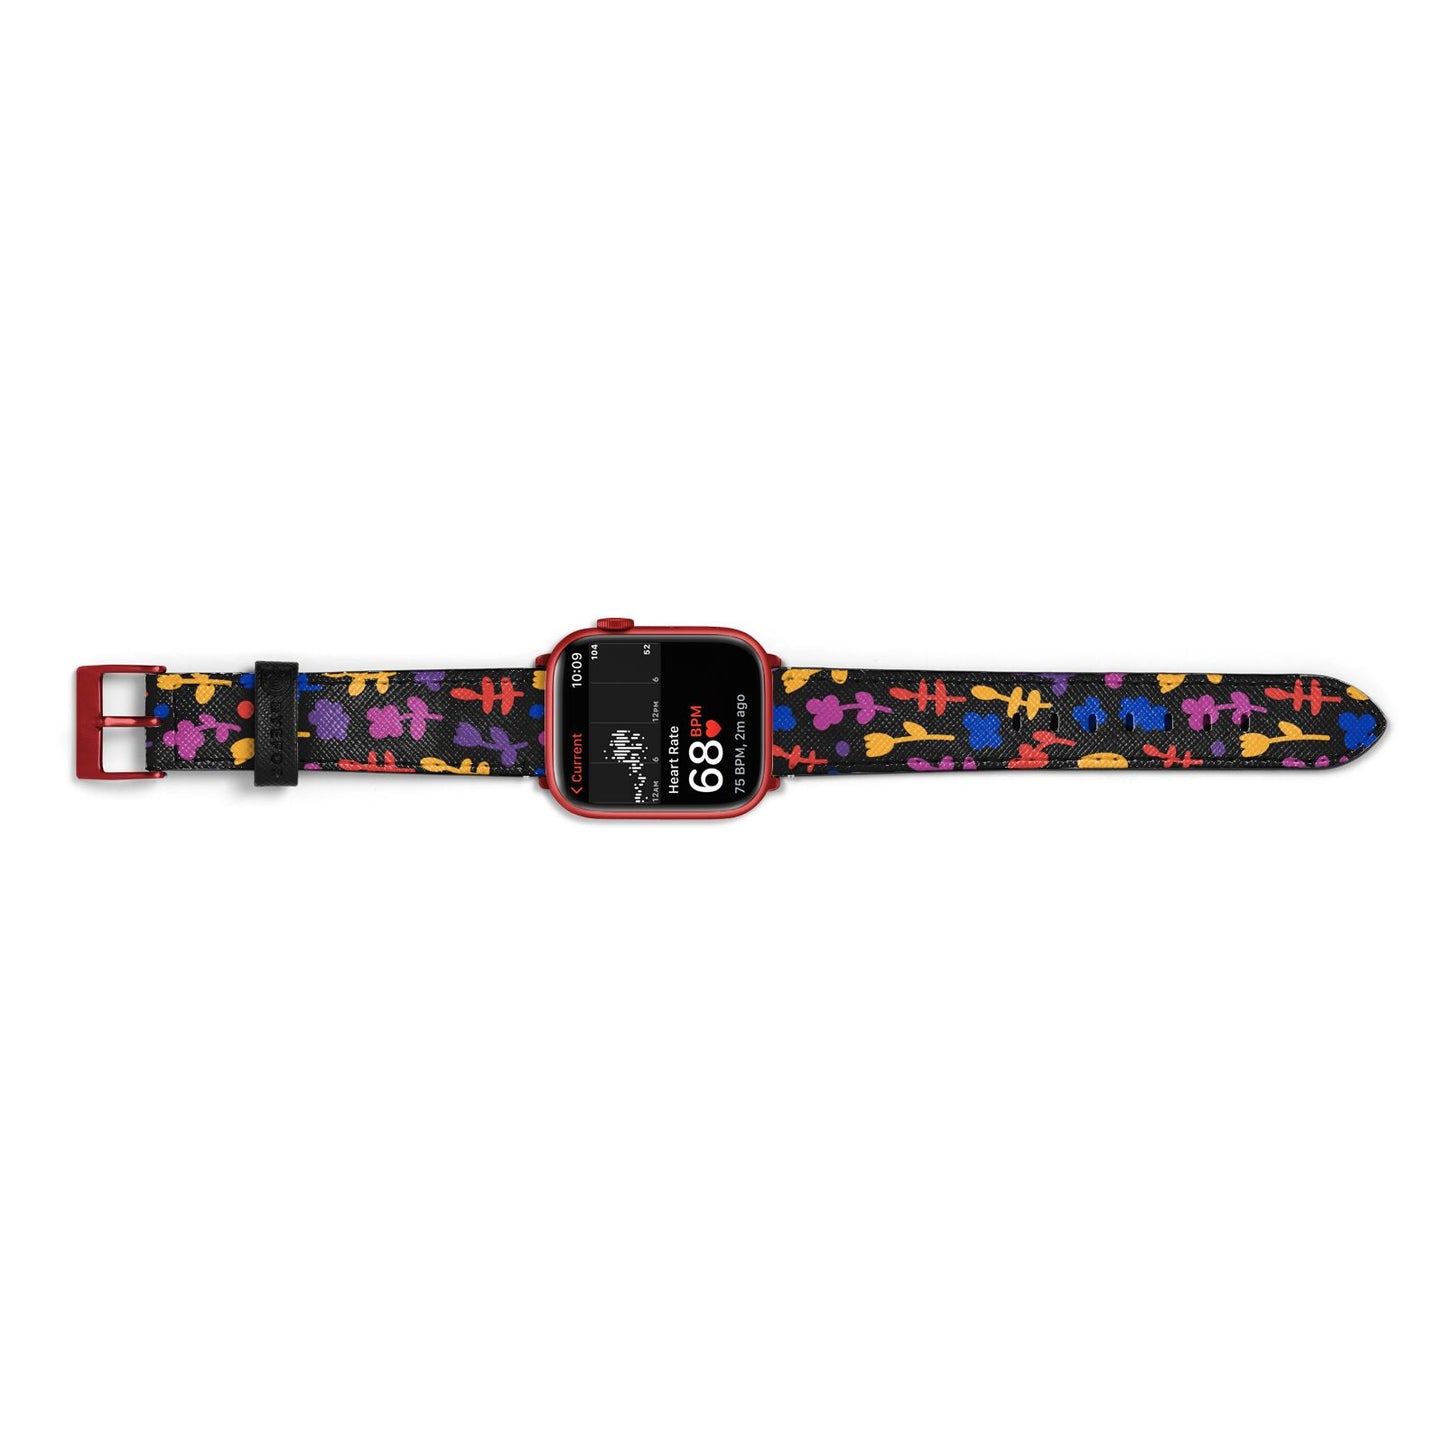 Abstract Floral Apple Watch Strap Size 38mm Landscape Image Red Hardware